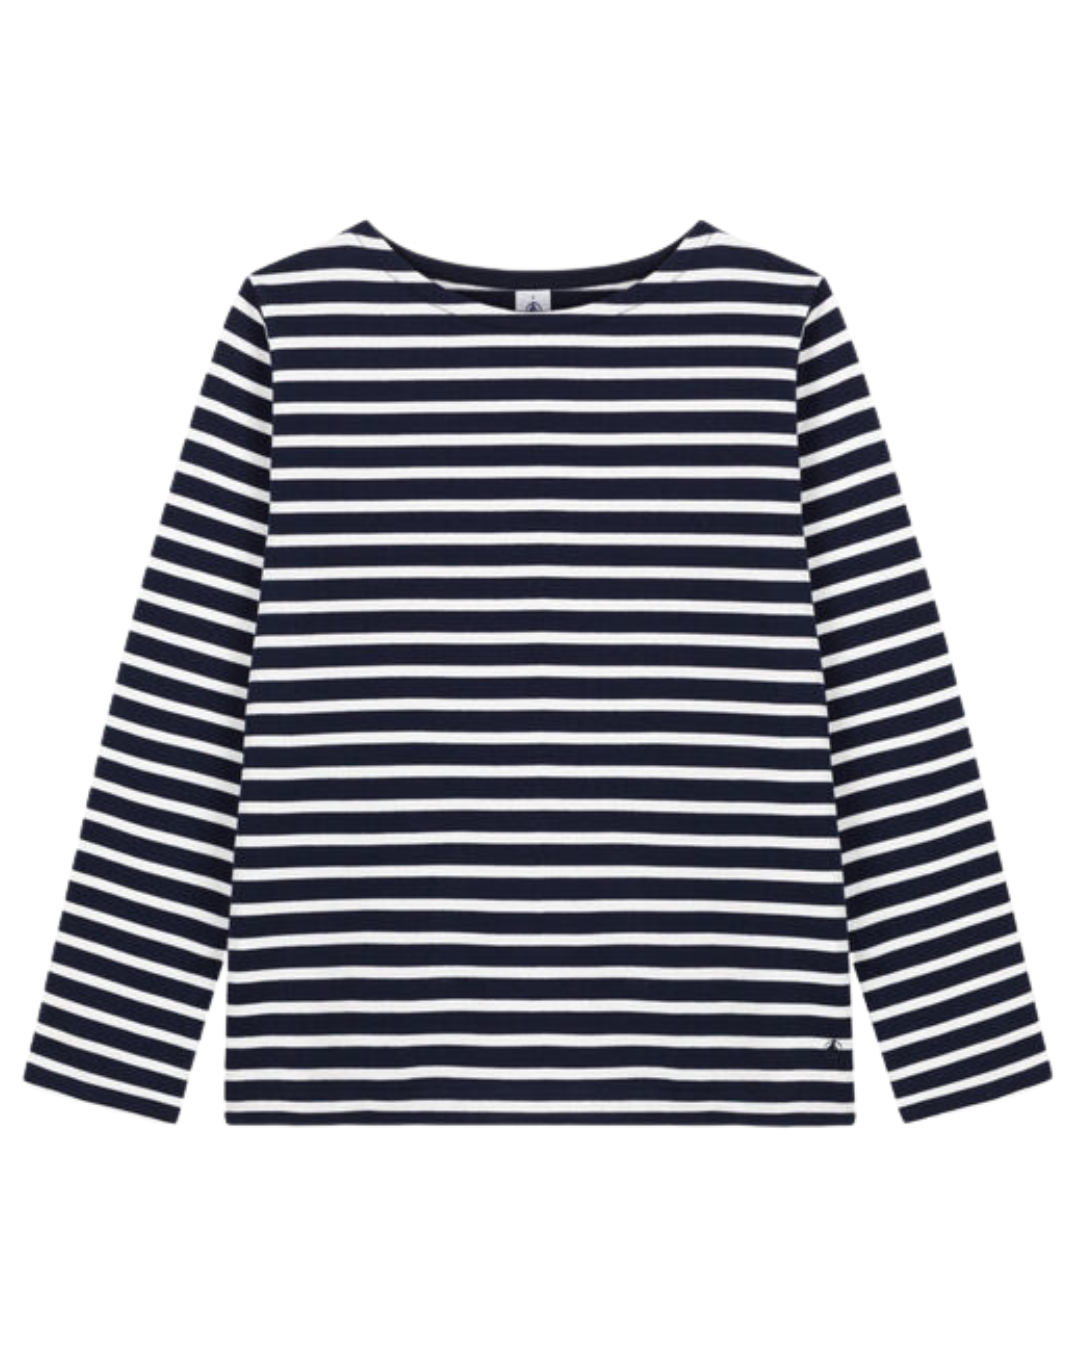 Long Sleeve Striped Mariner Top in Navy/White